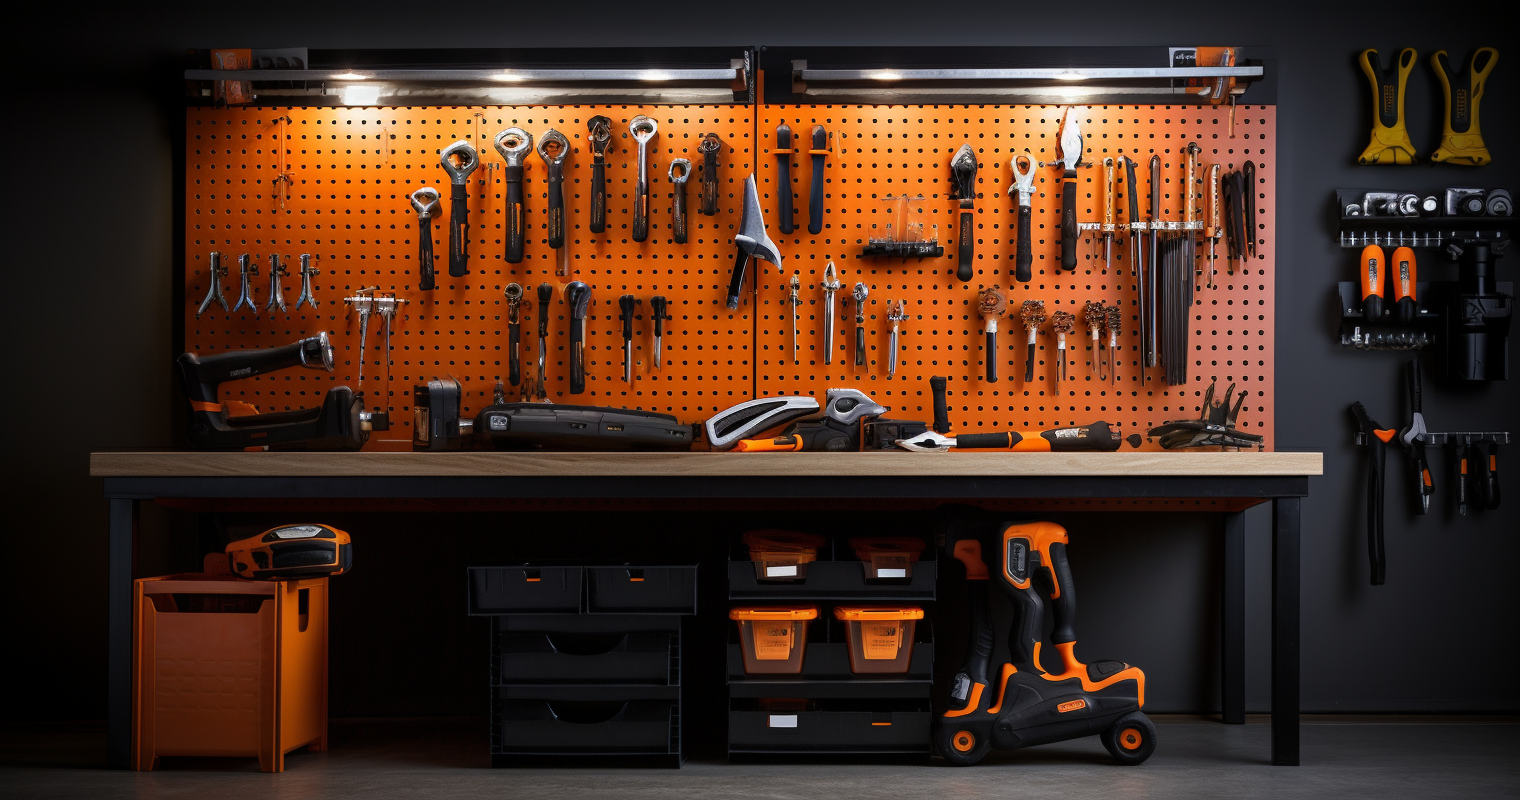  How To Store Power Tools In Garage
